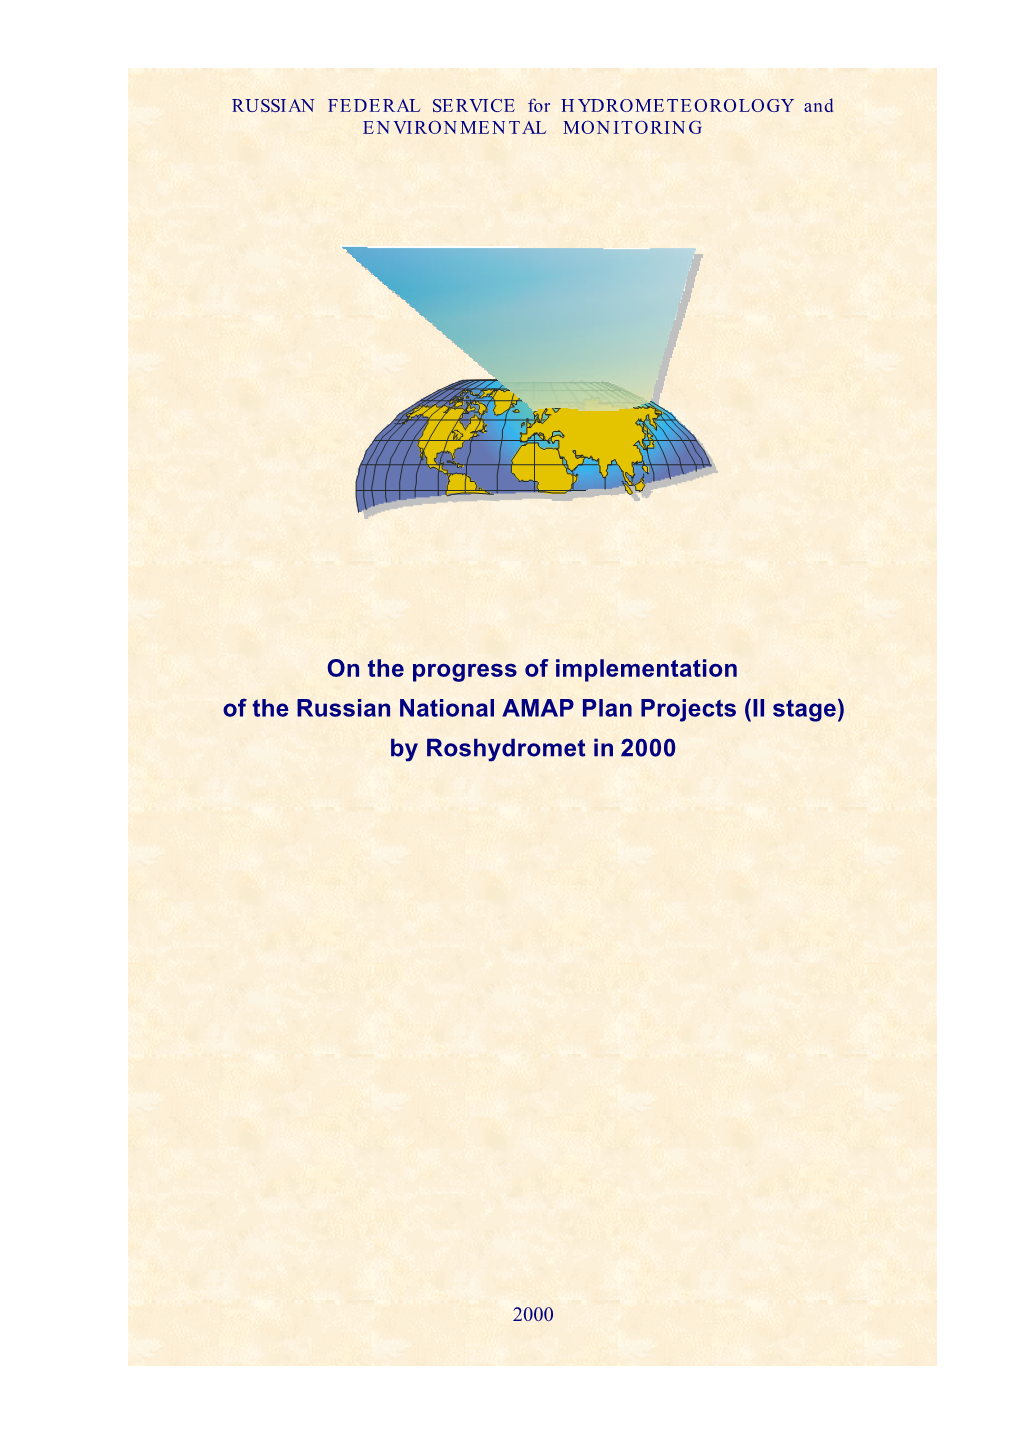 On the Progress of Implementation of the Russian National AMAP Plan Projects (II Stage) by Roshydromet in 2000